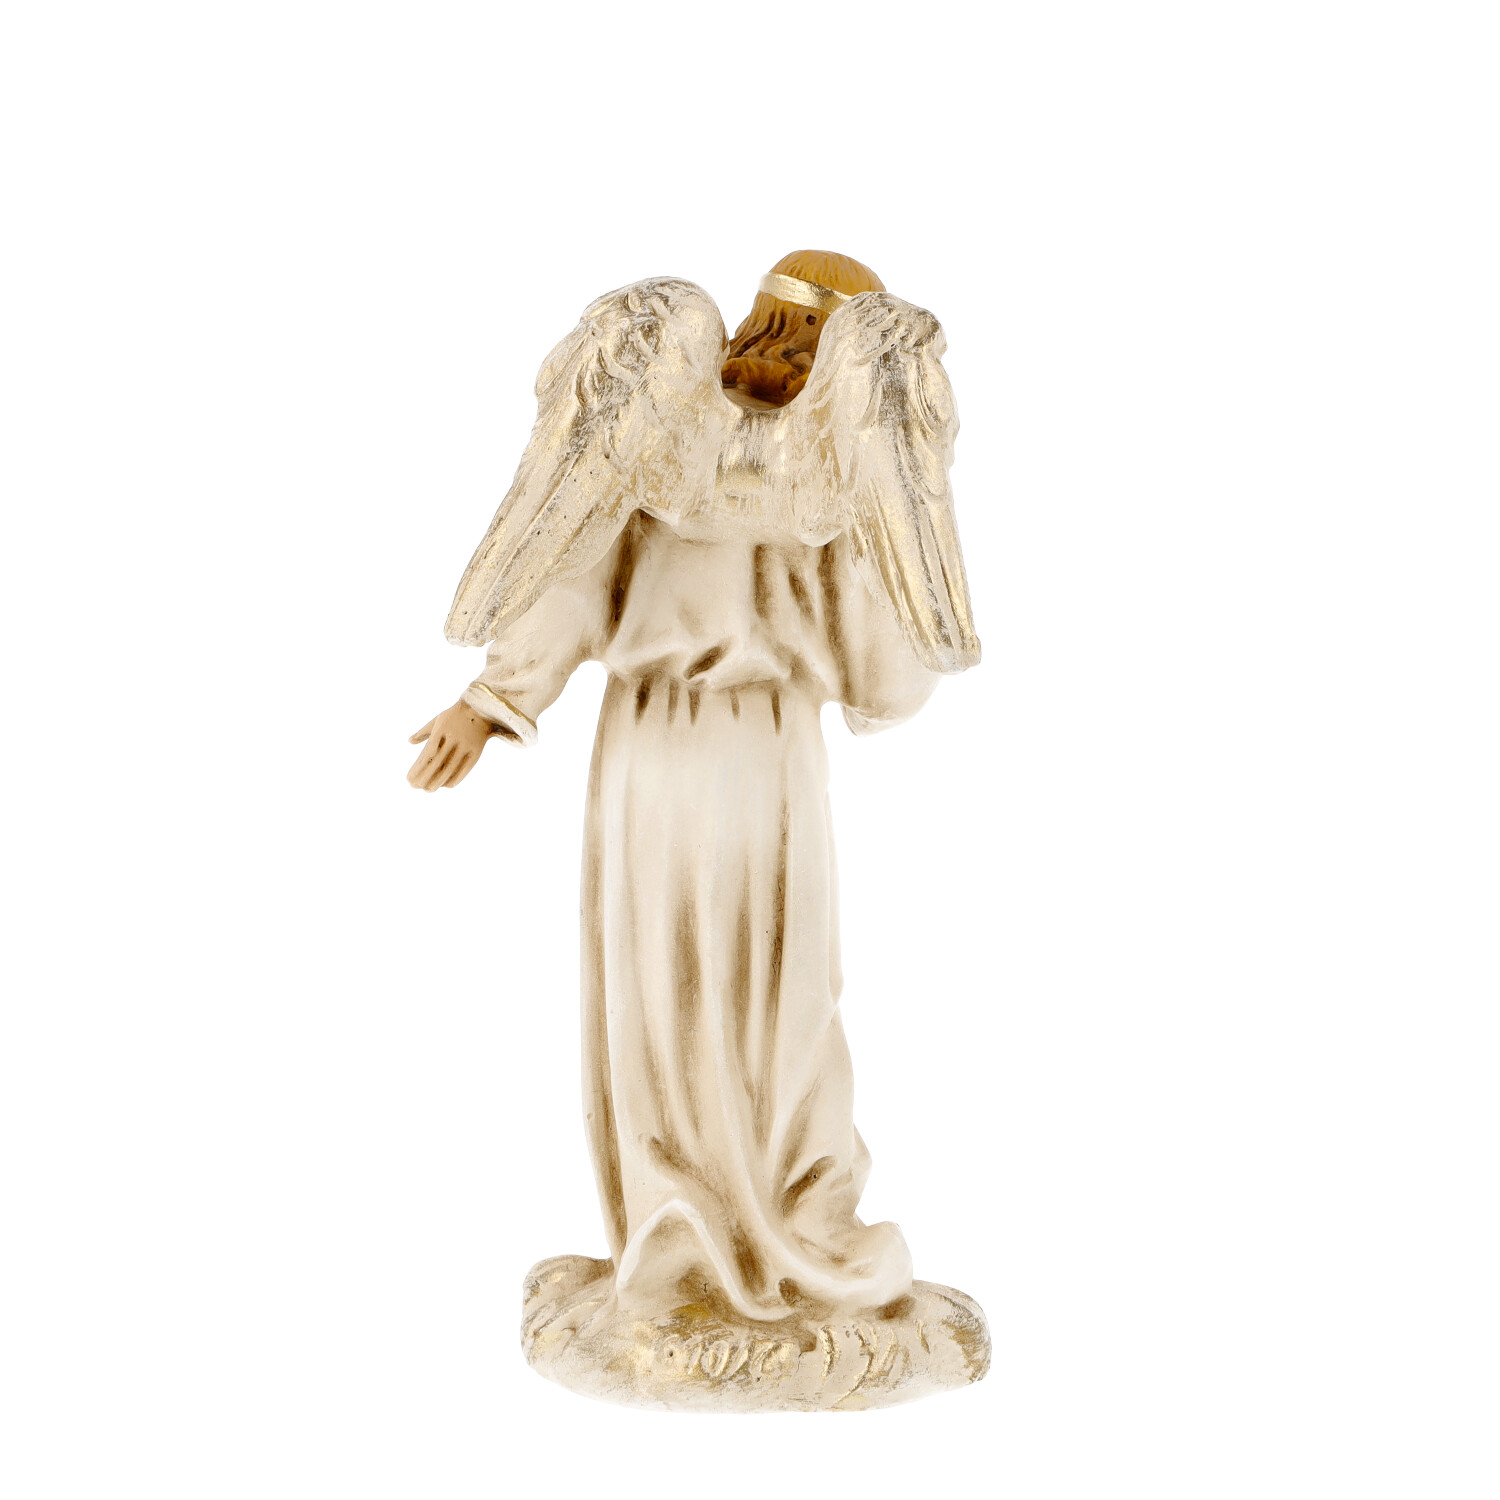 Proclaiming angel - Marolin papermaché - made in Germany